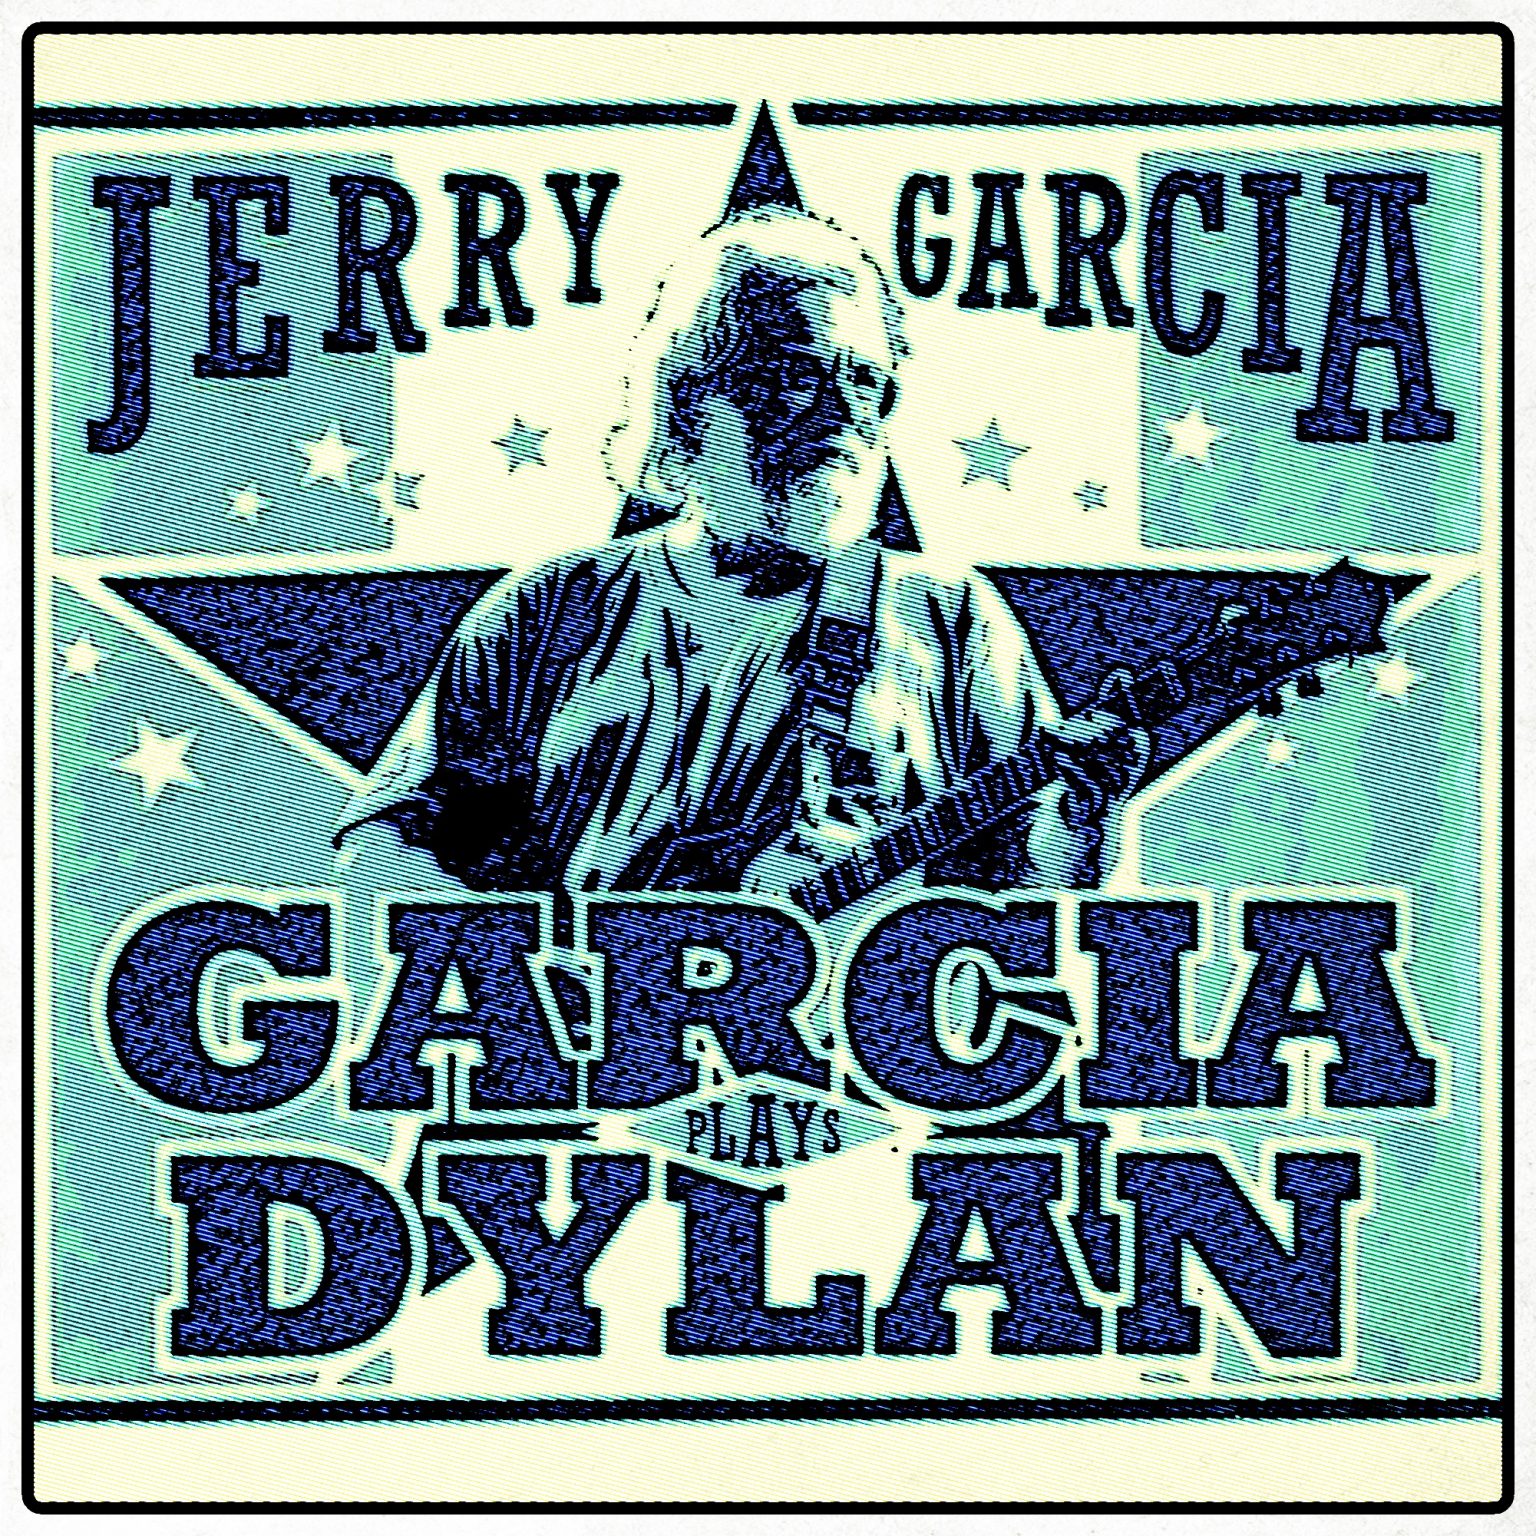 best jerry garcia band songs